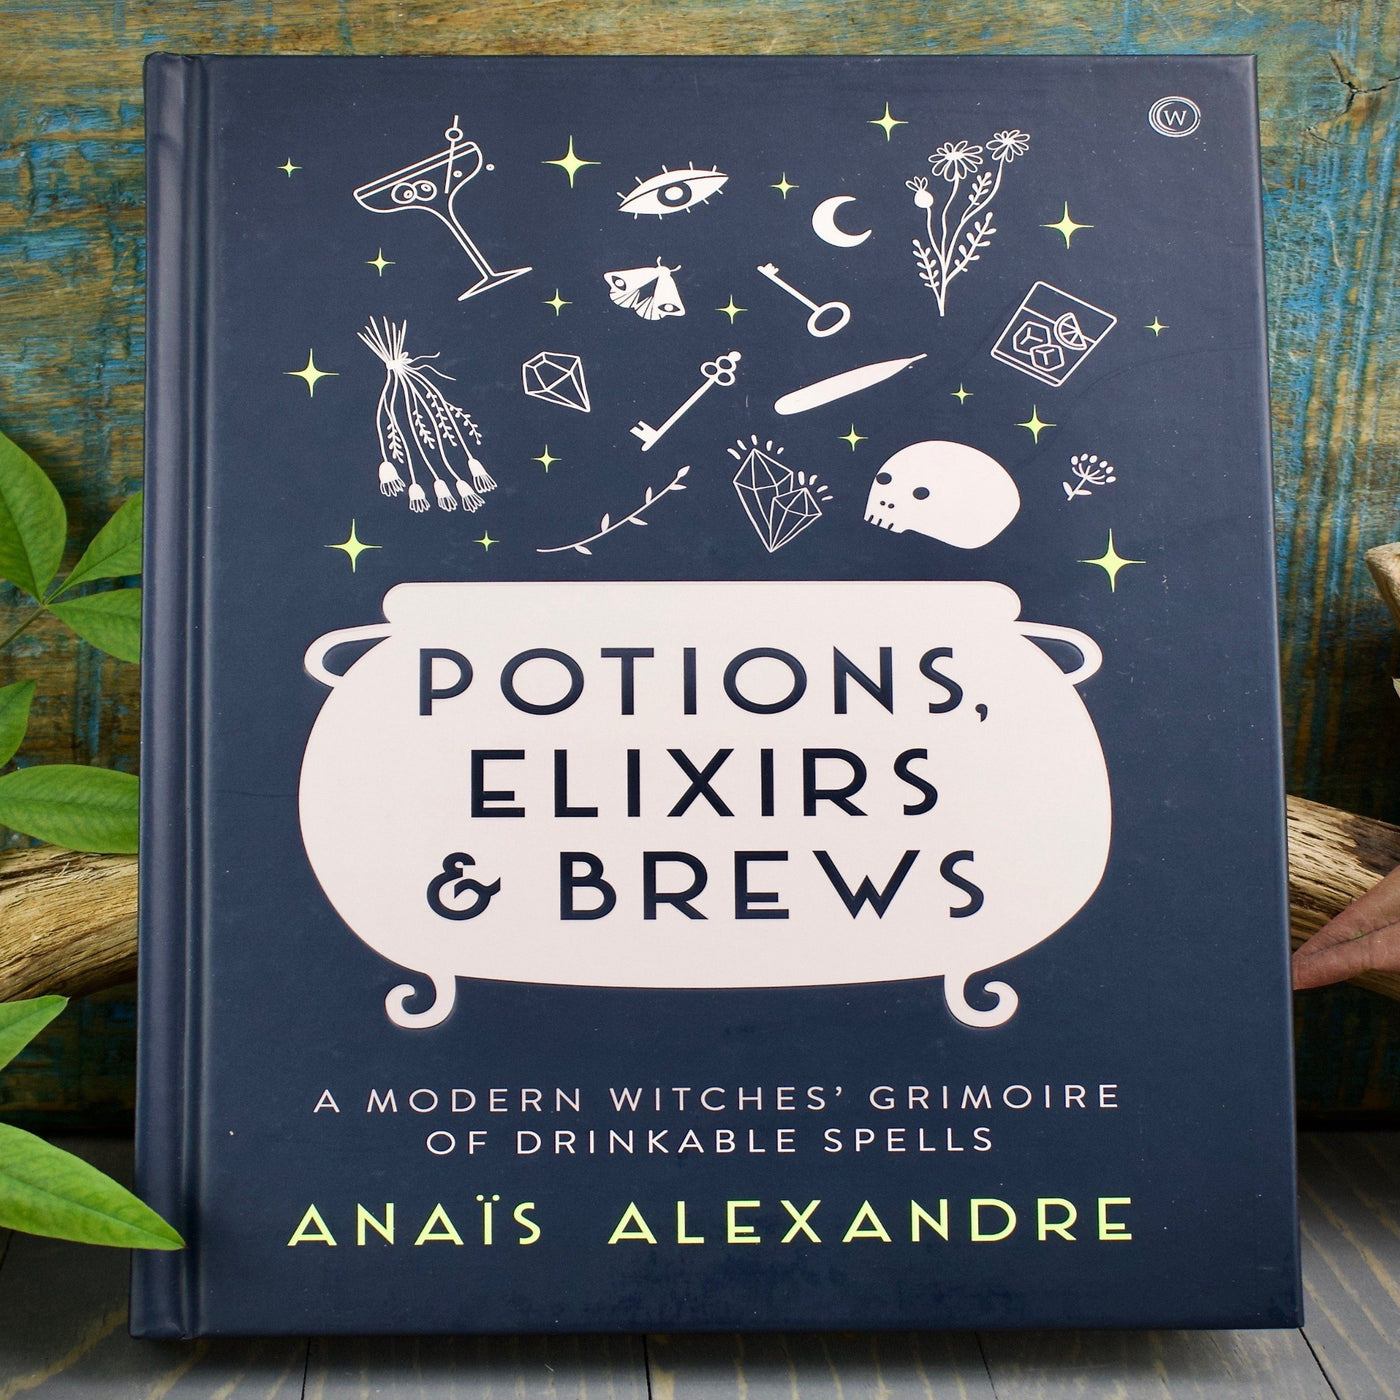 Potions, Elixirs & Brews: A Modern Witch's Grimoire of Drinkable Spells